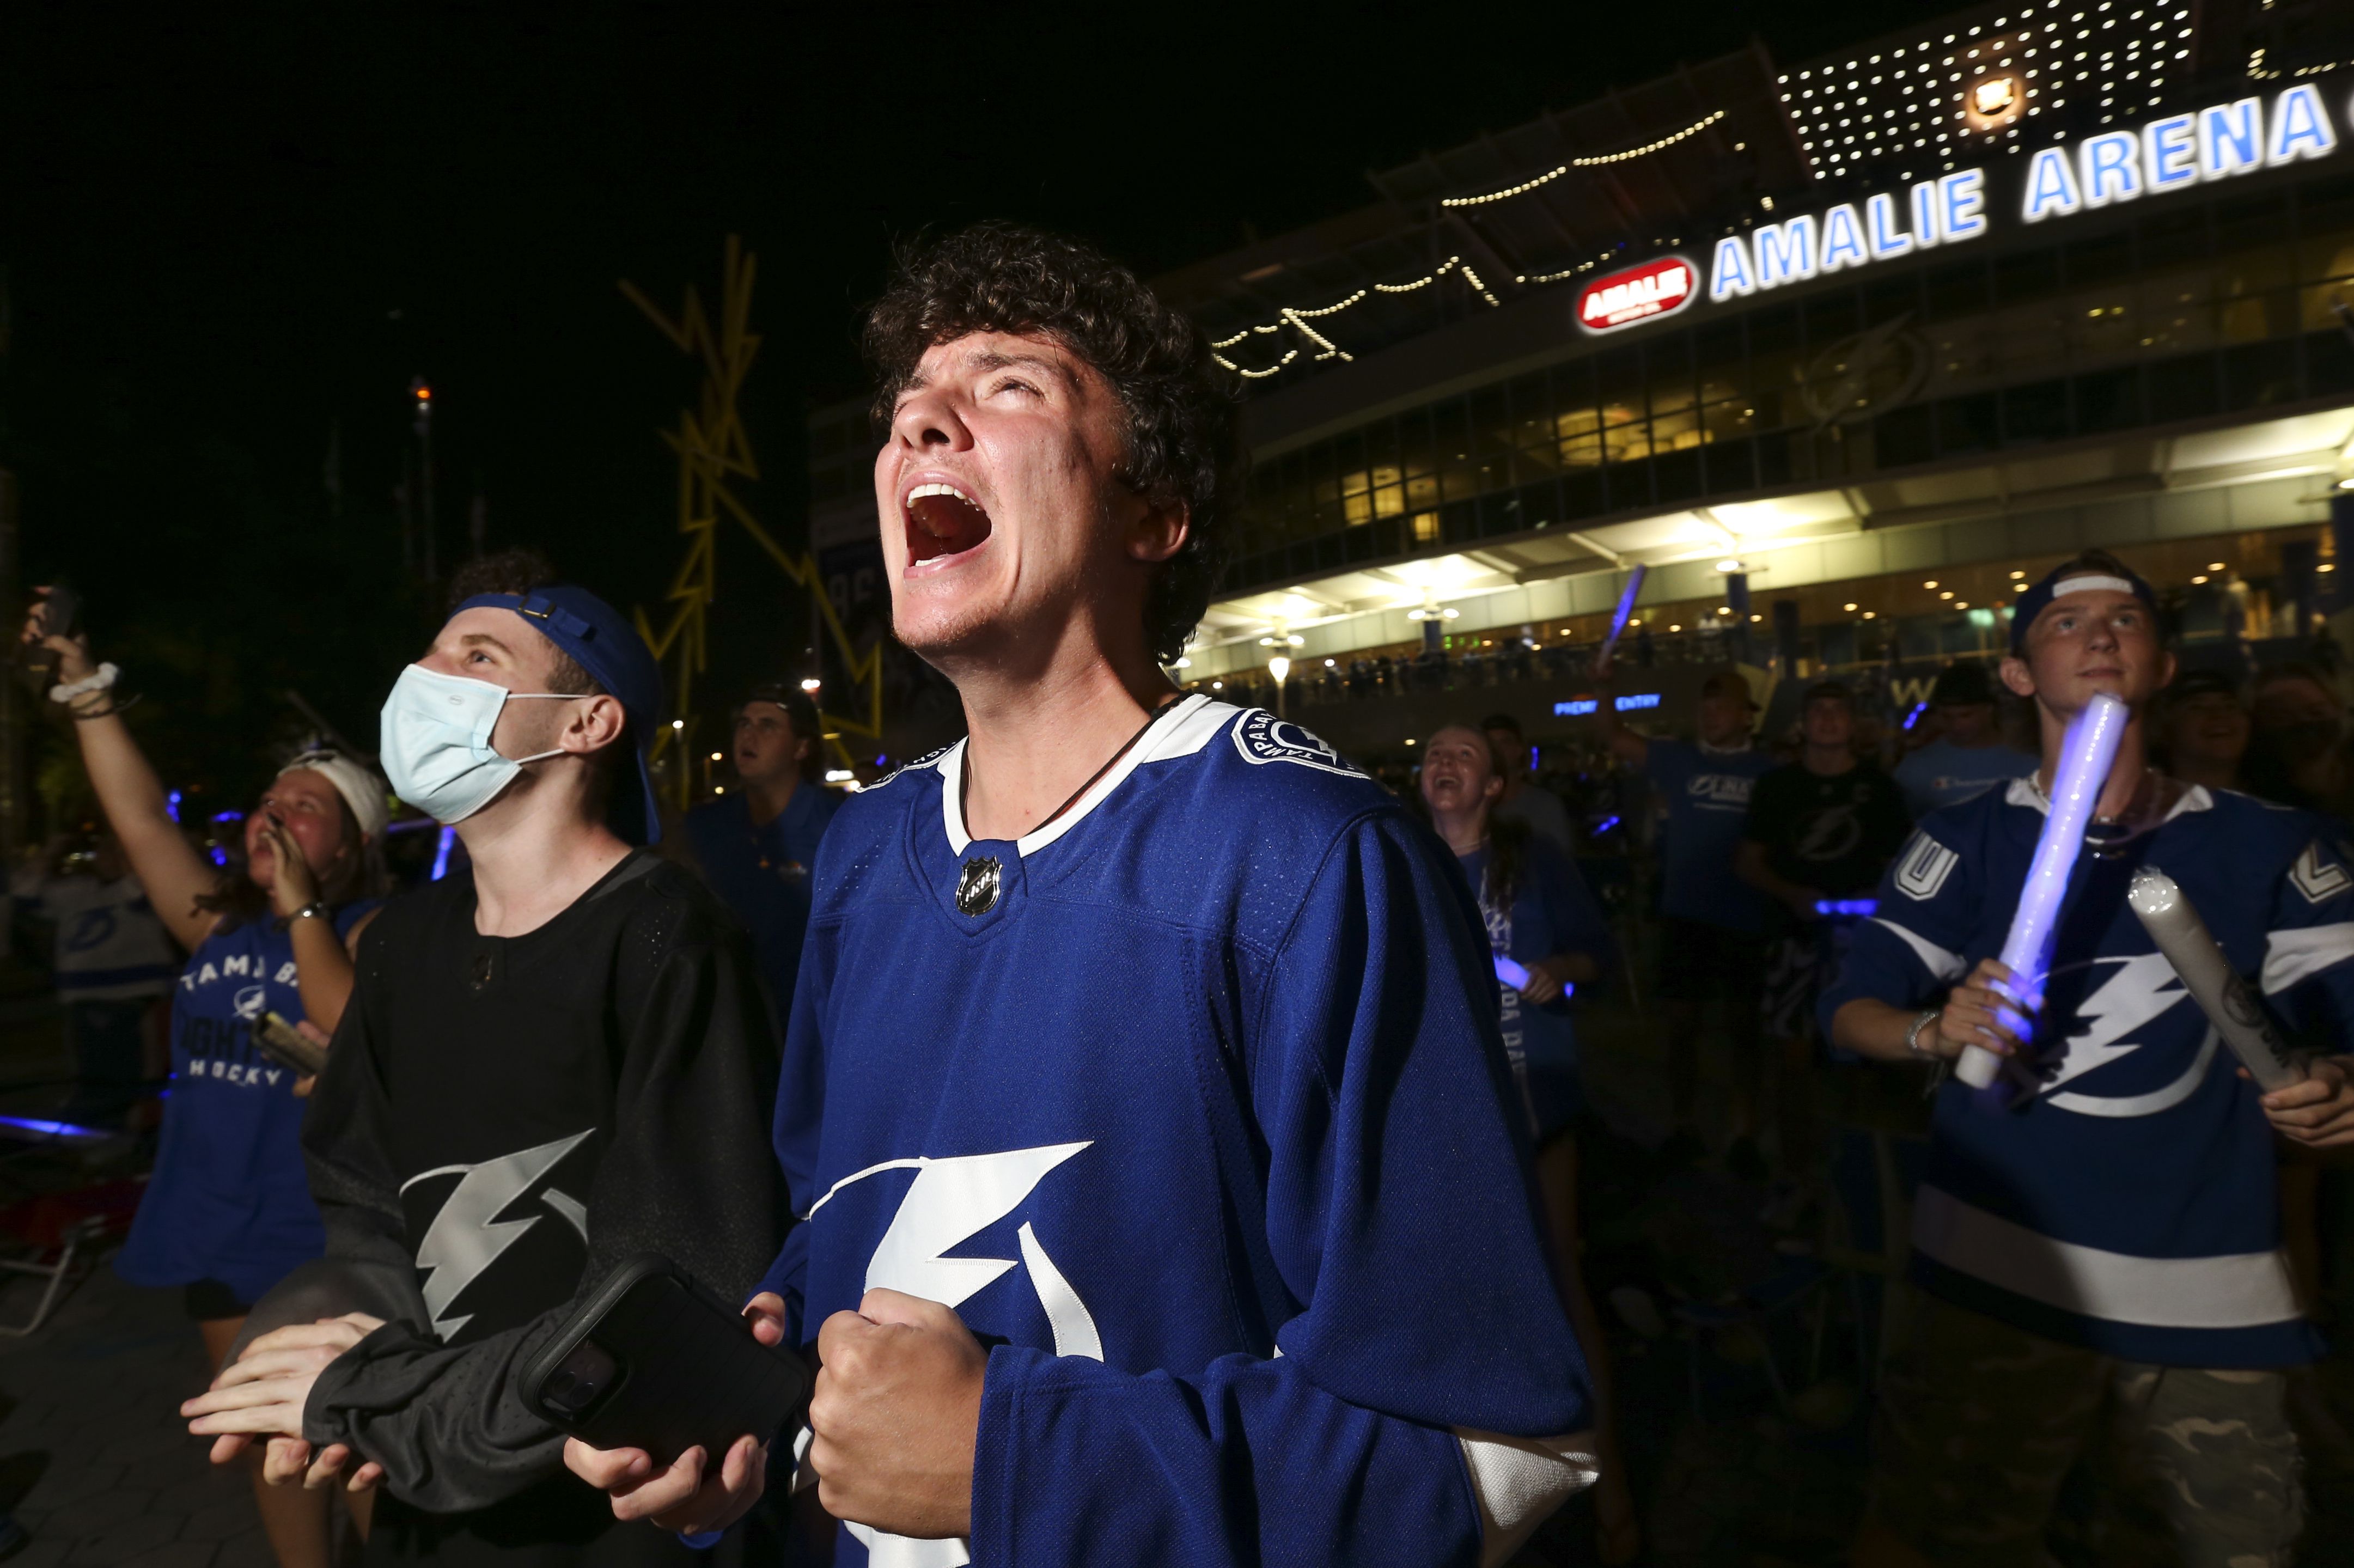 The Lightning is fun, but does its playoff run translate into dollars for  Tampa?